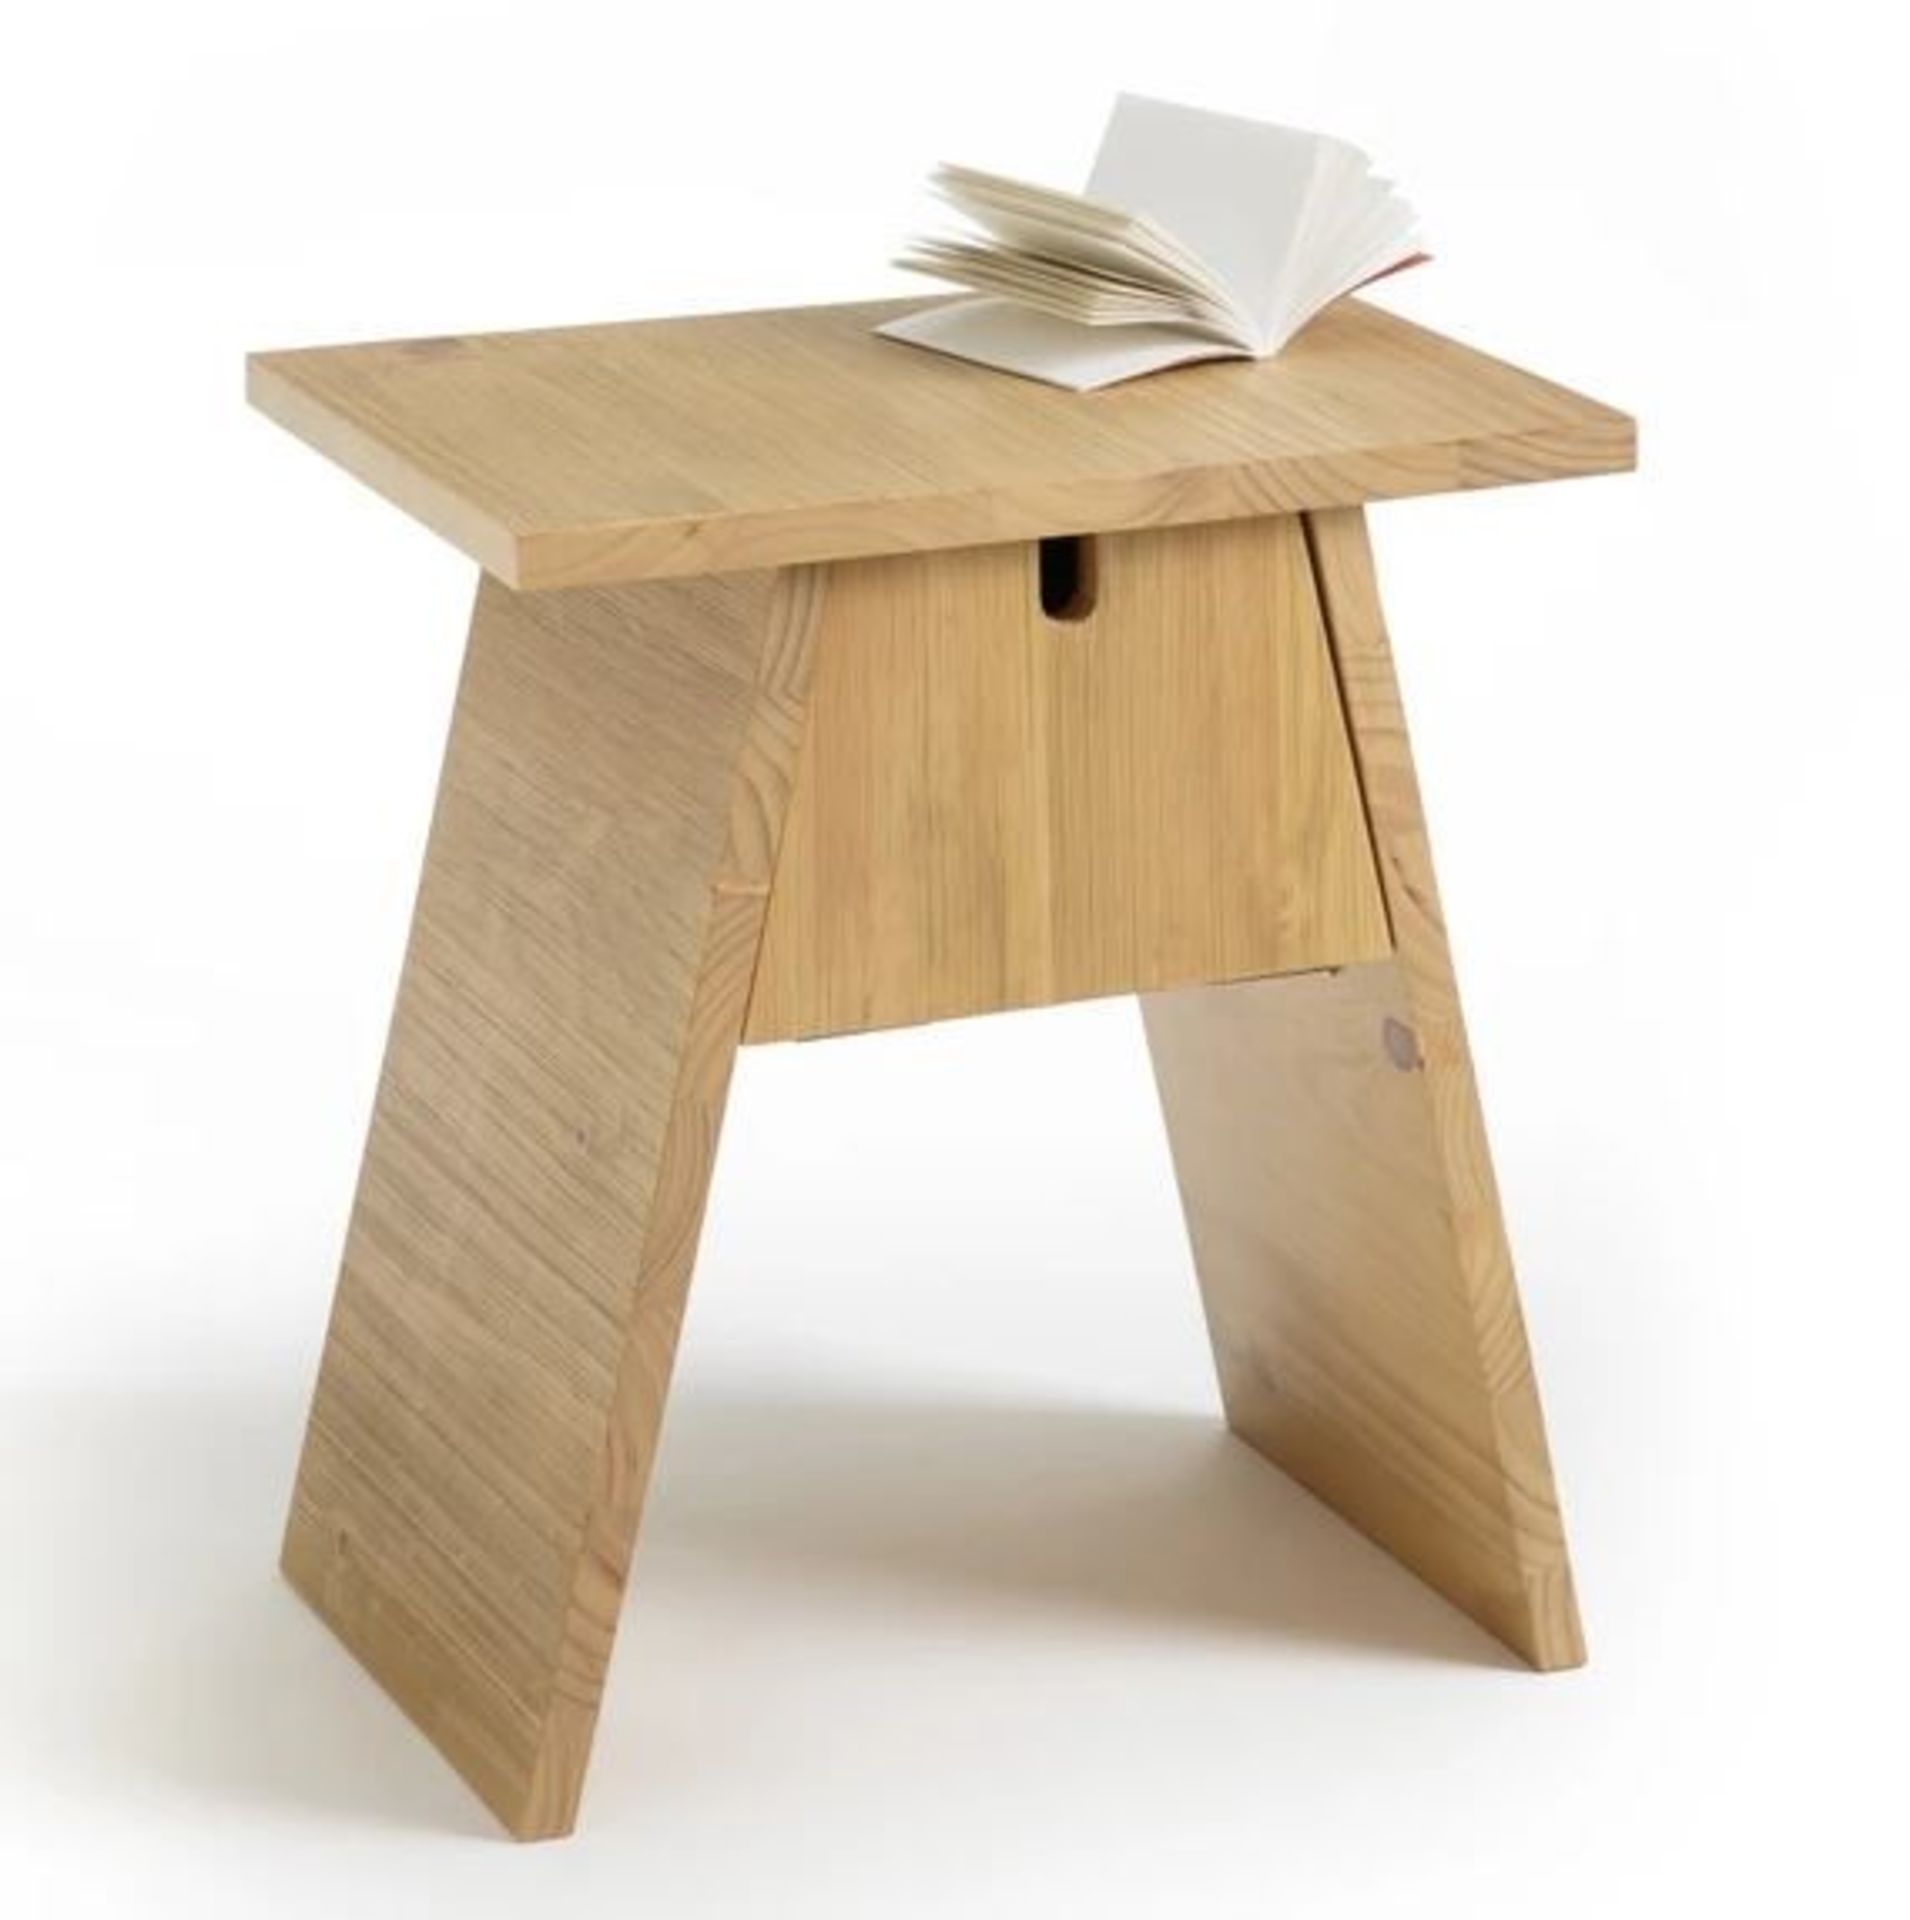 1 GRADE B BOXED DESIGNER ASAYO SOLID OAK BEDSIDE TABLE / RRP £85.00 (PUBLIC VIEWING AVAILABLE)